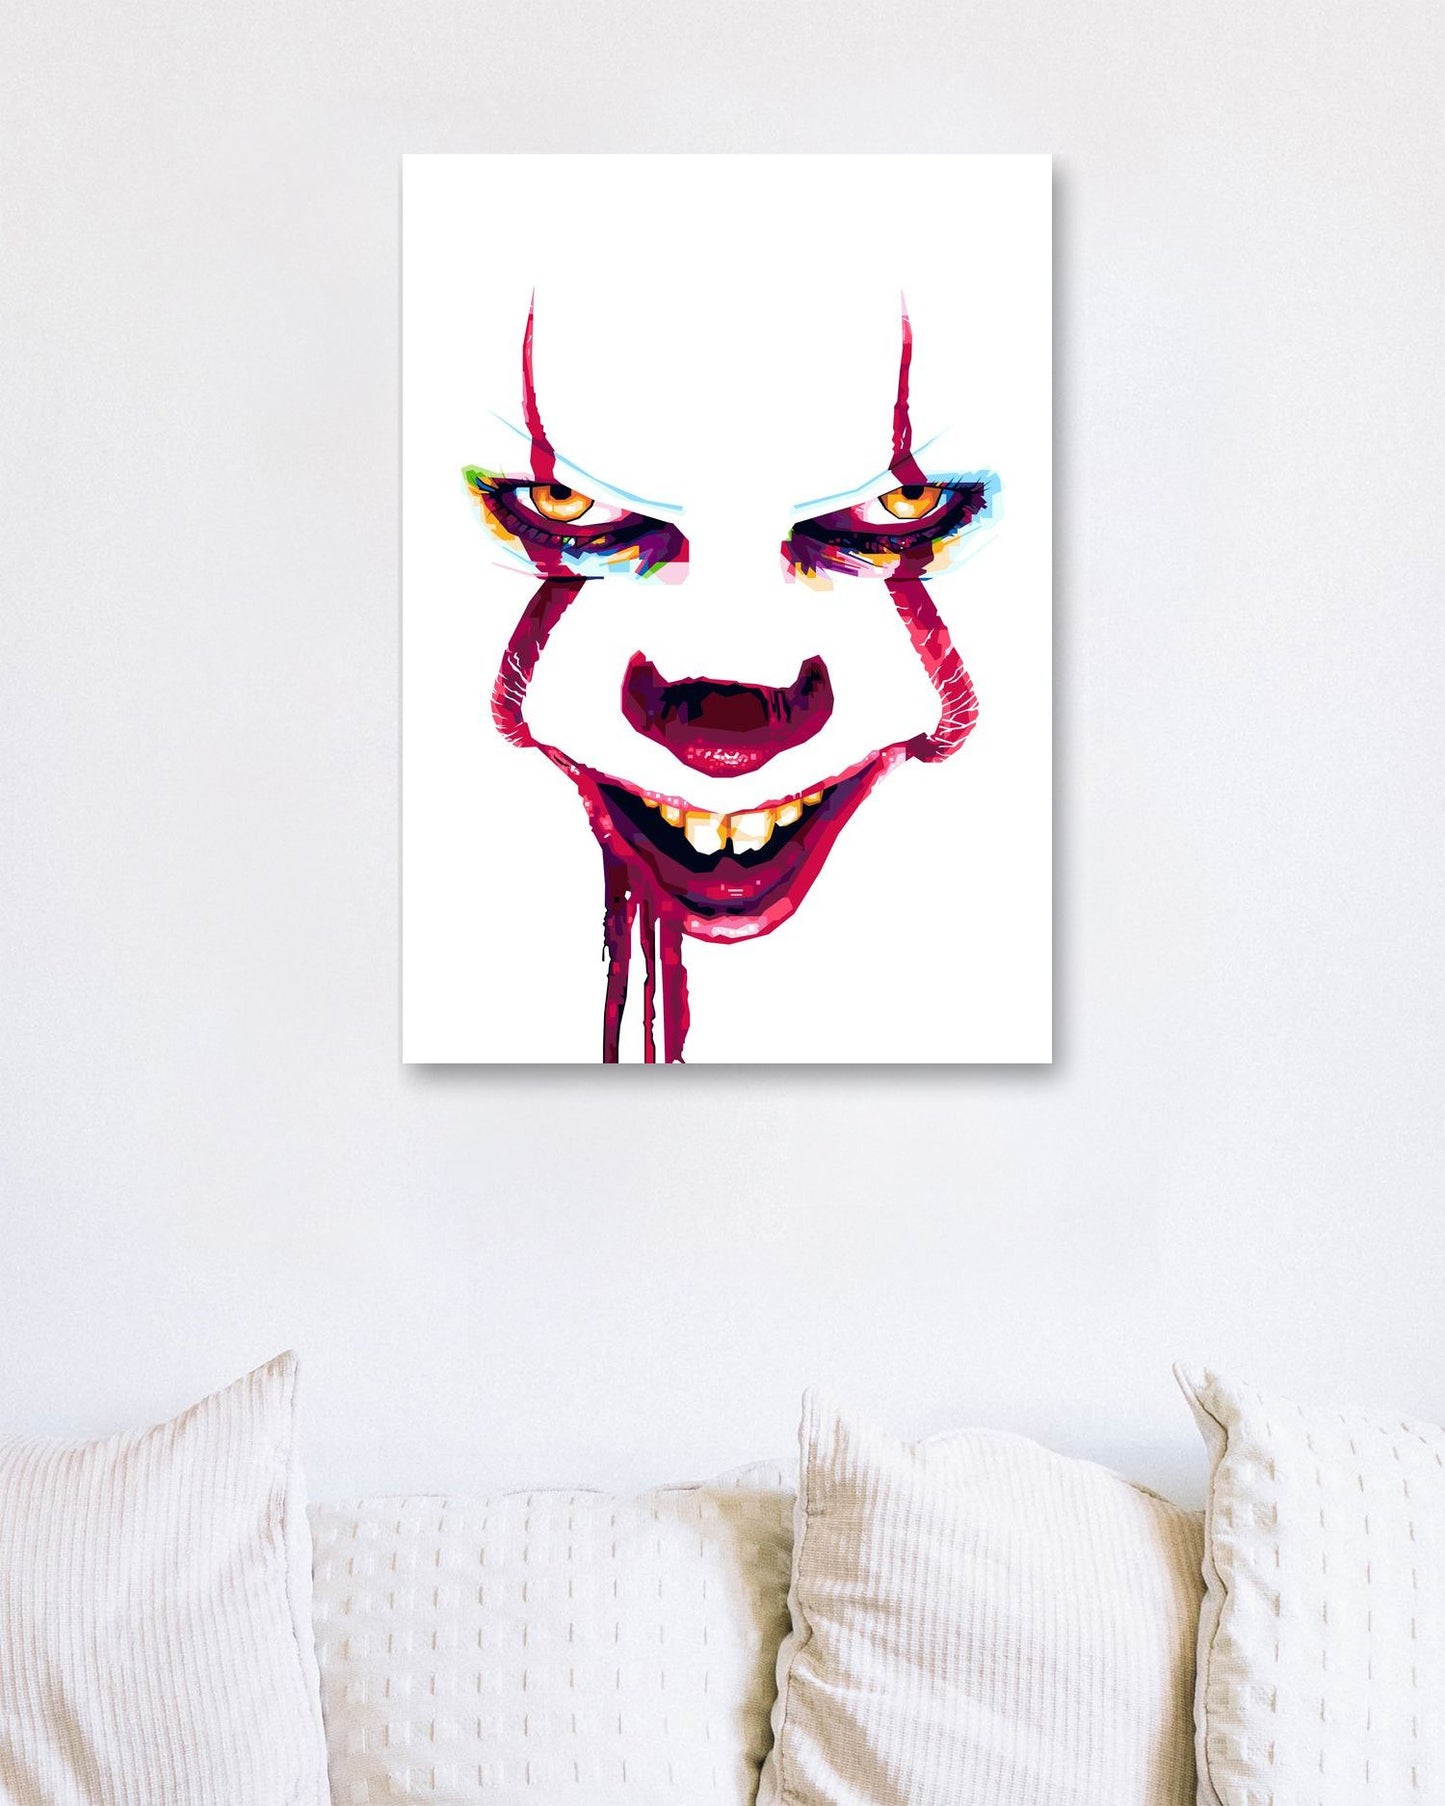 Pennywise White - @MKSTUDIO